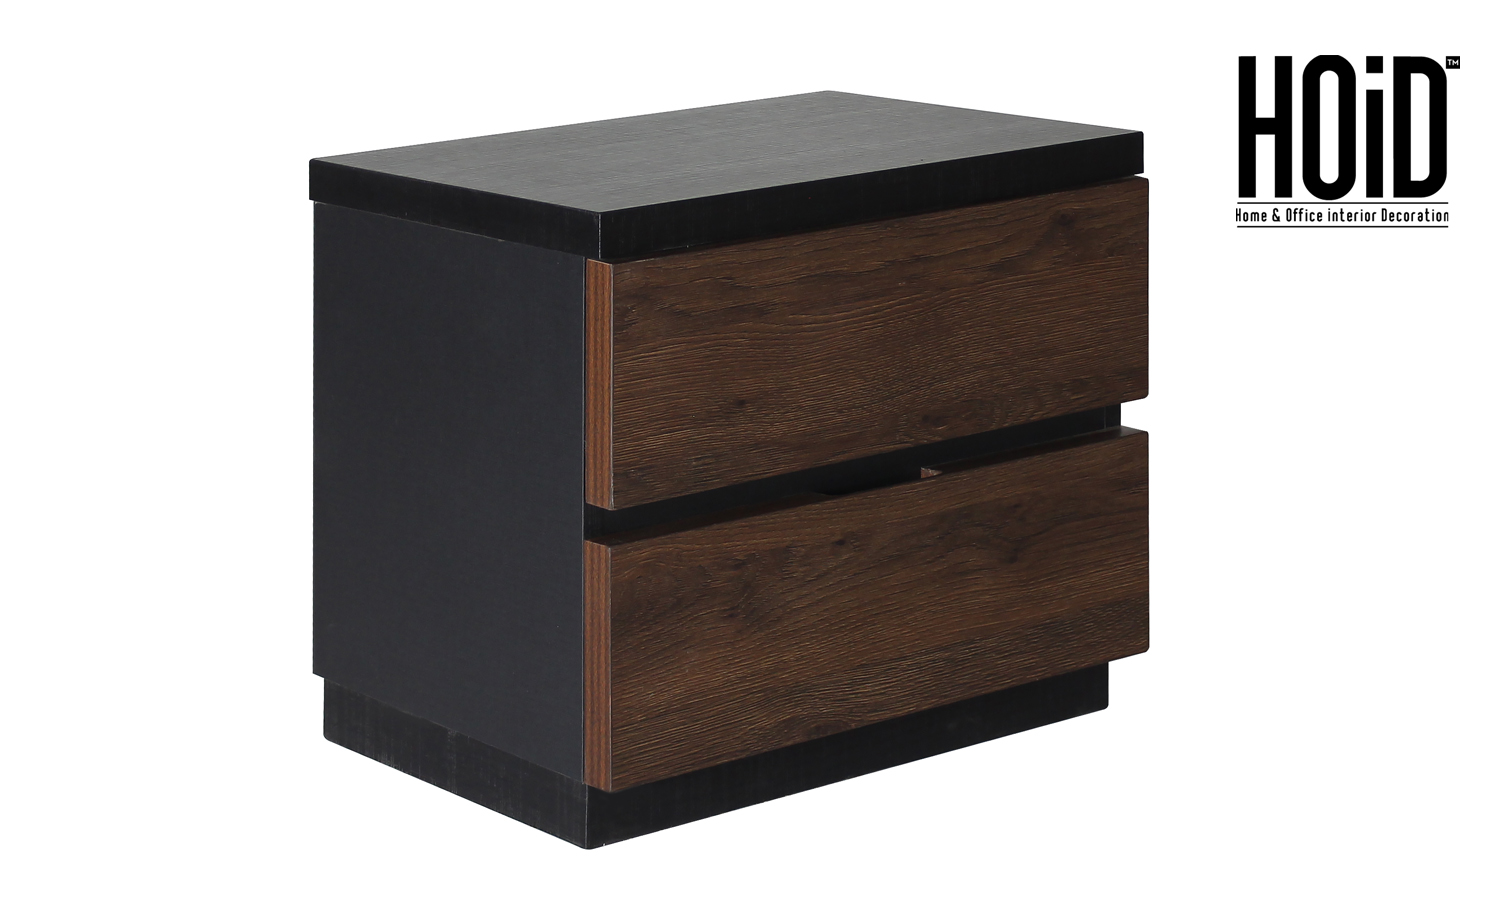 cora-side-table-with-2-drawers-01-1.jpg